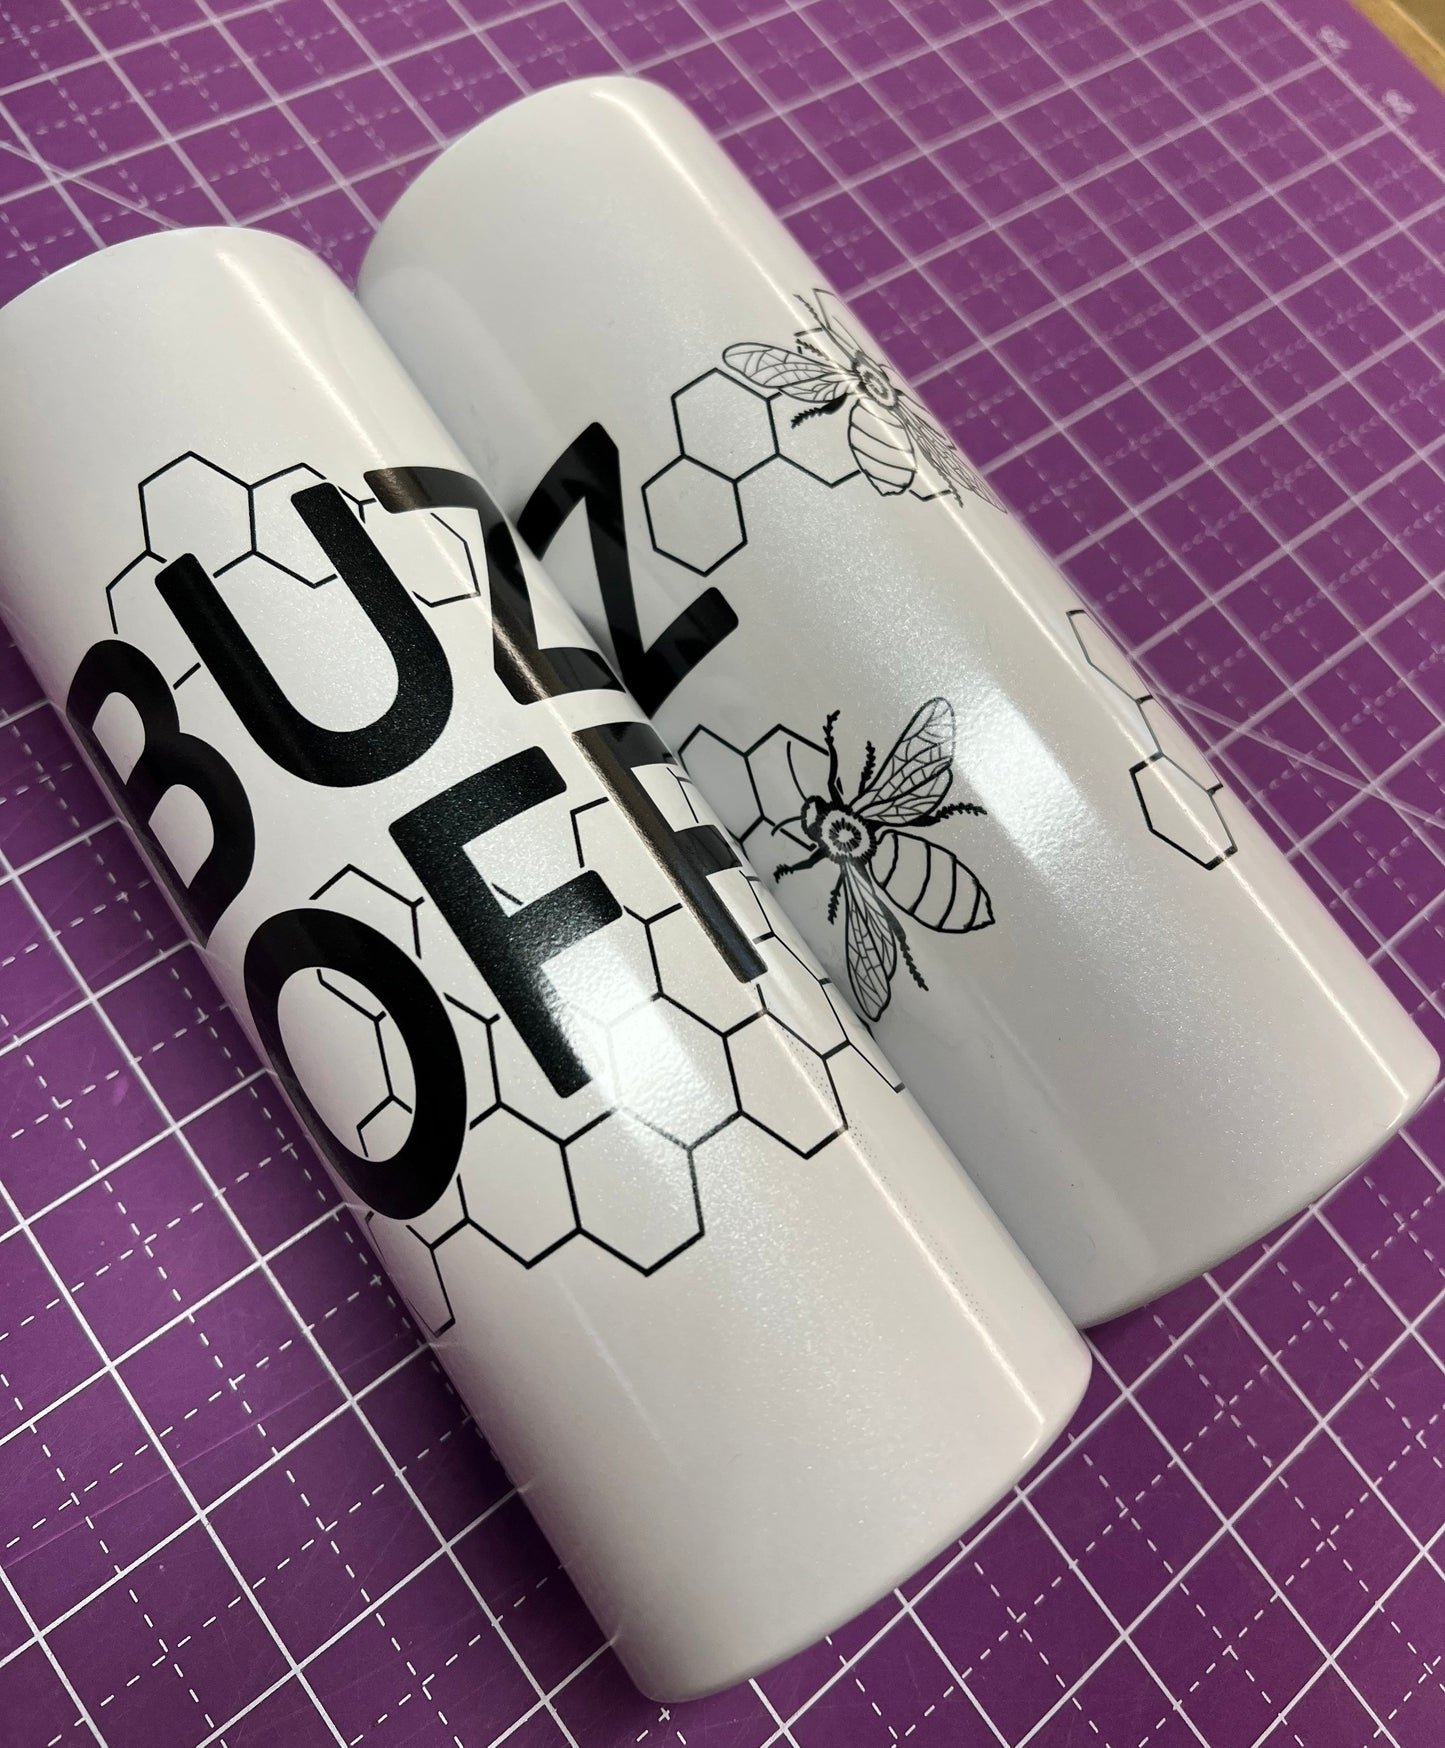 BUZZ OFF Color Changing Tumbler UV Glow in the Dark